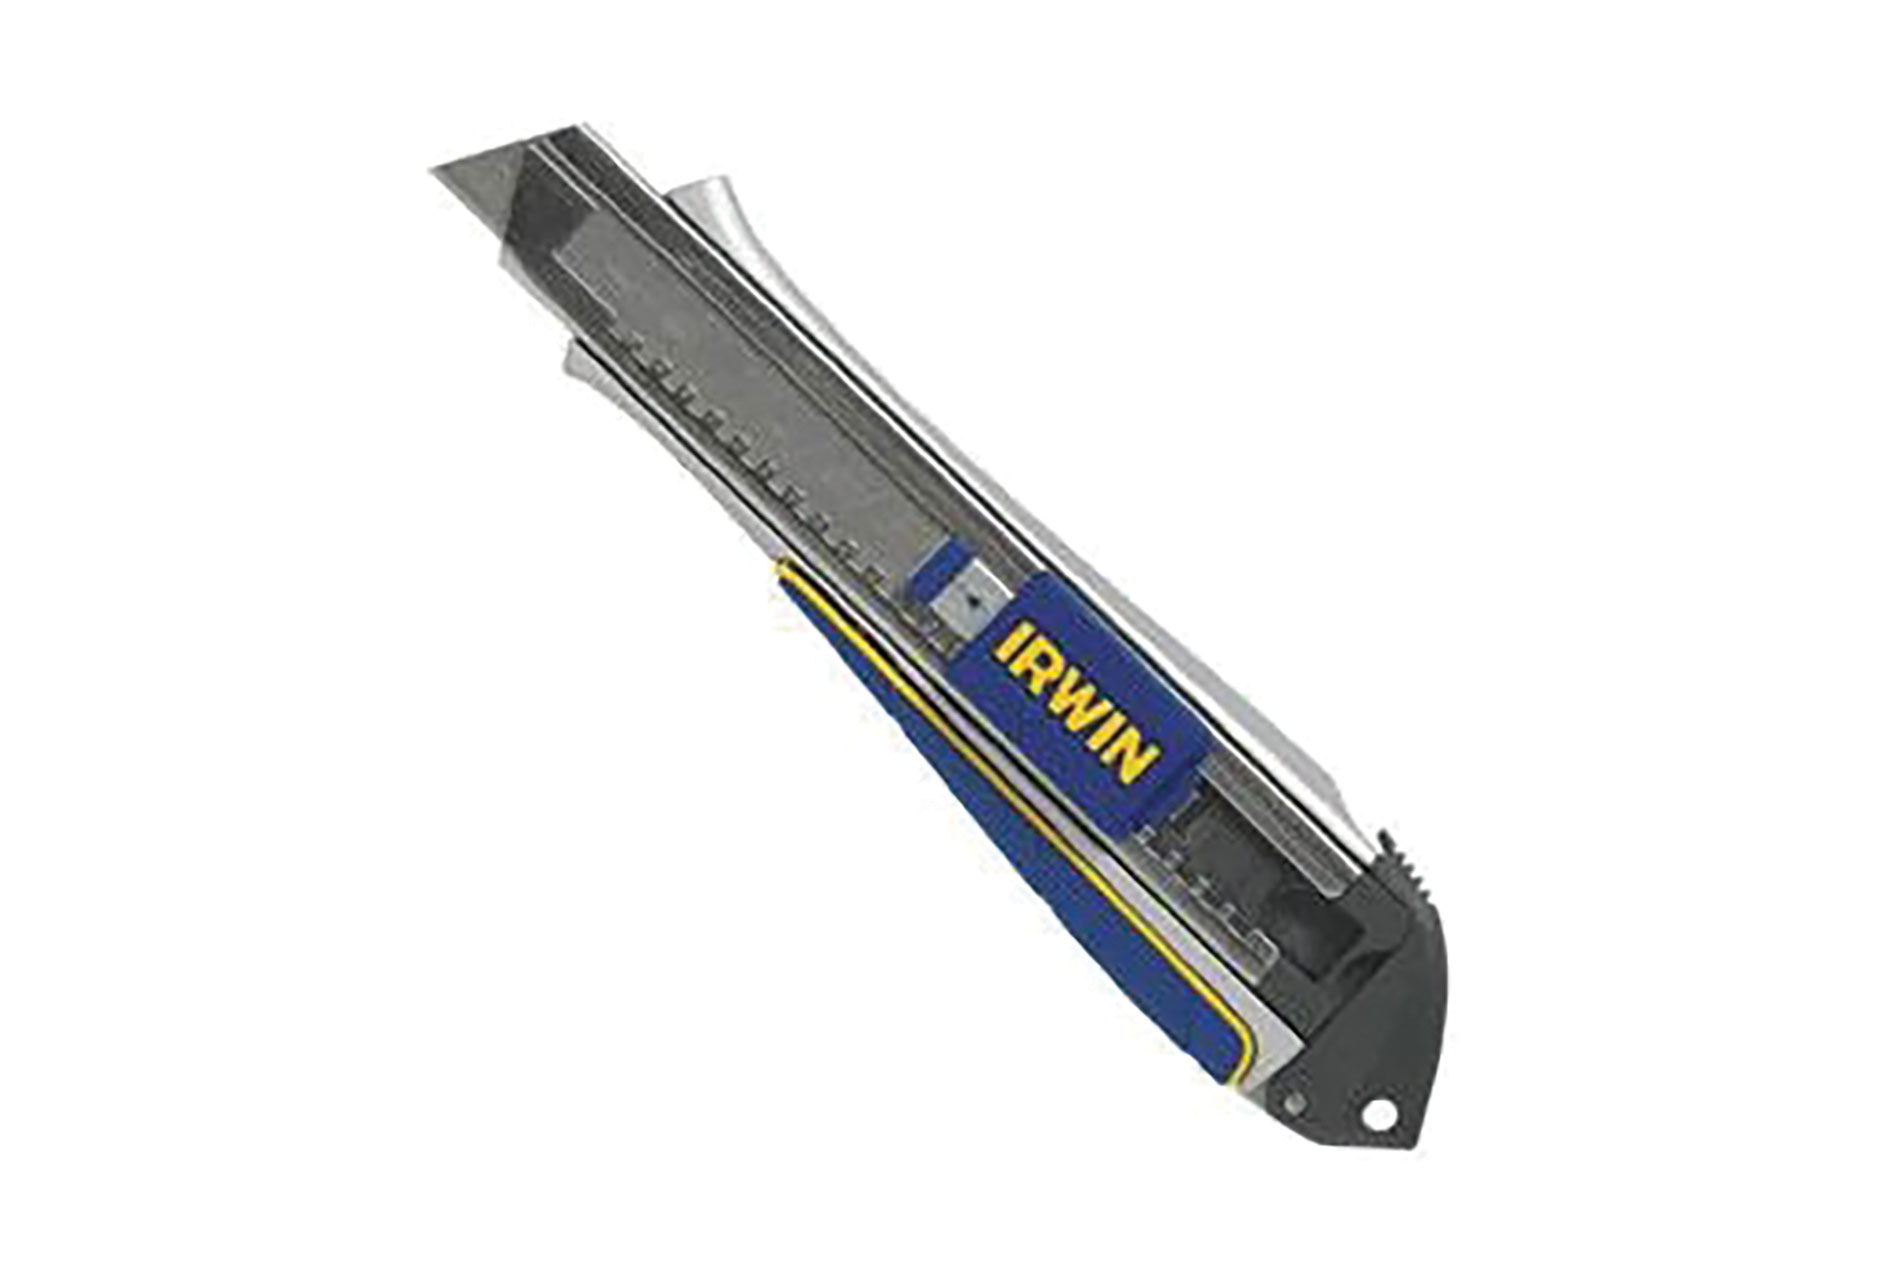 Gray knife with blue and yellow Irwin logo. Image by Irwin Tools.